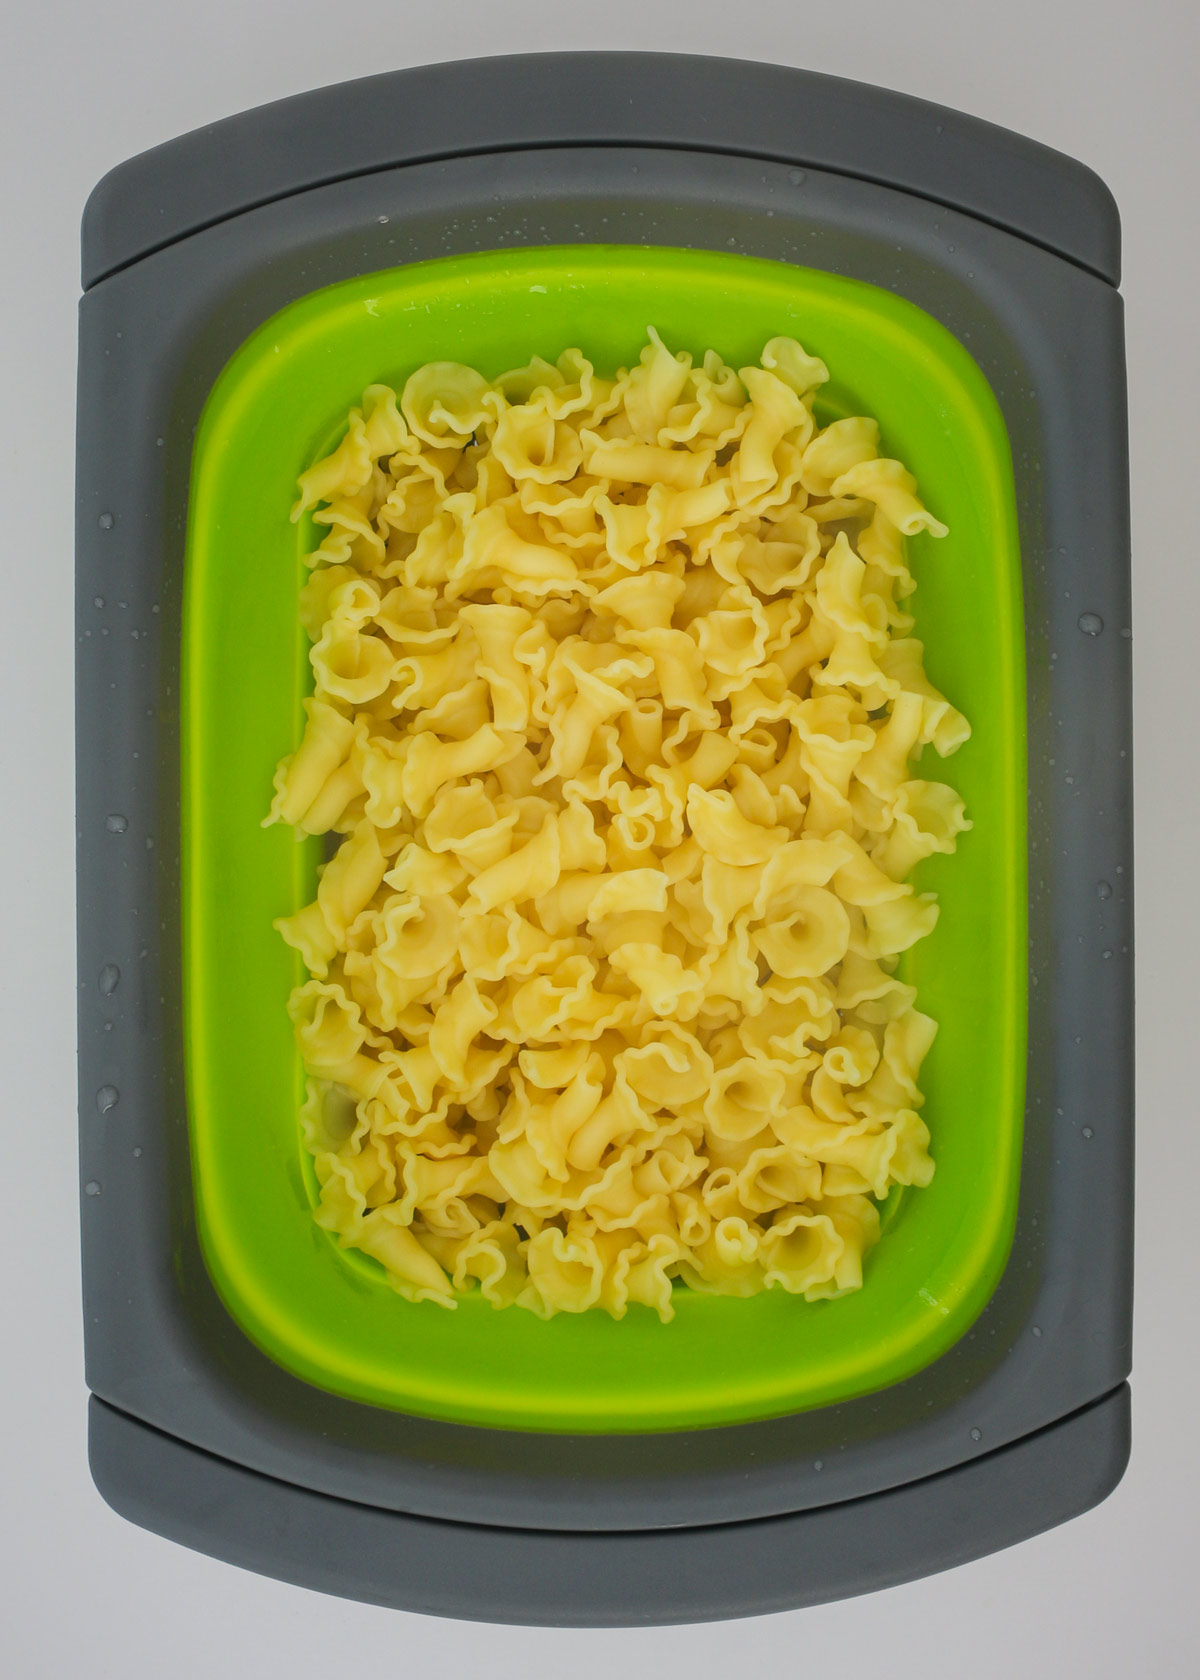 cooked and drained pasta in a collander.